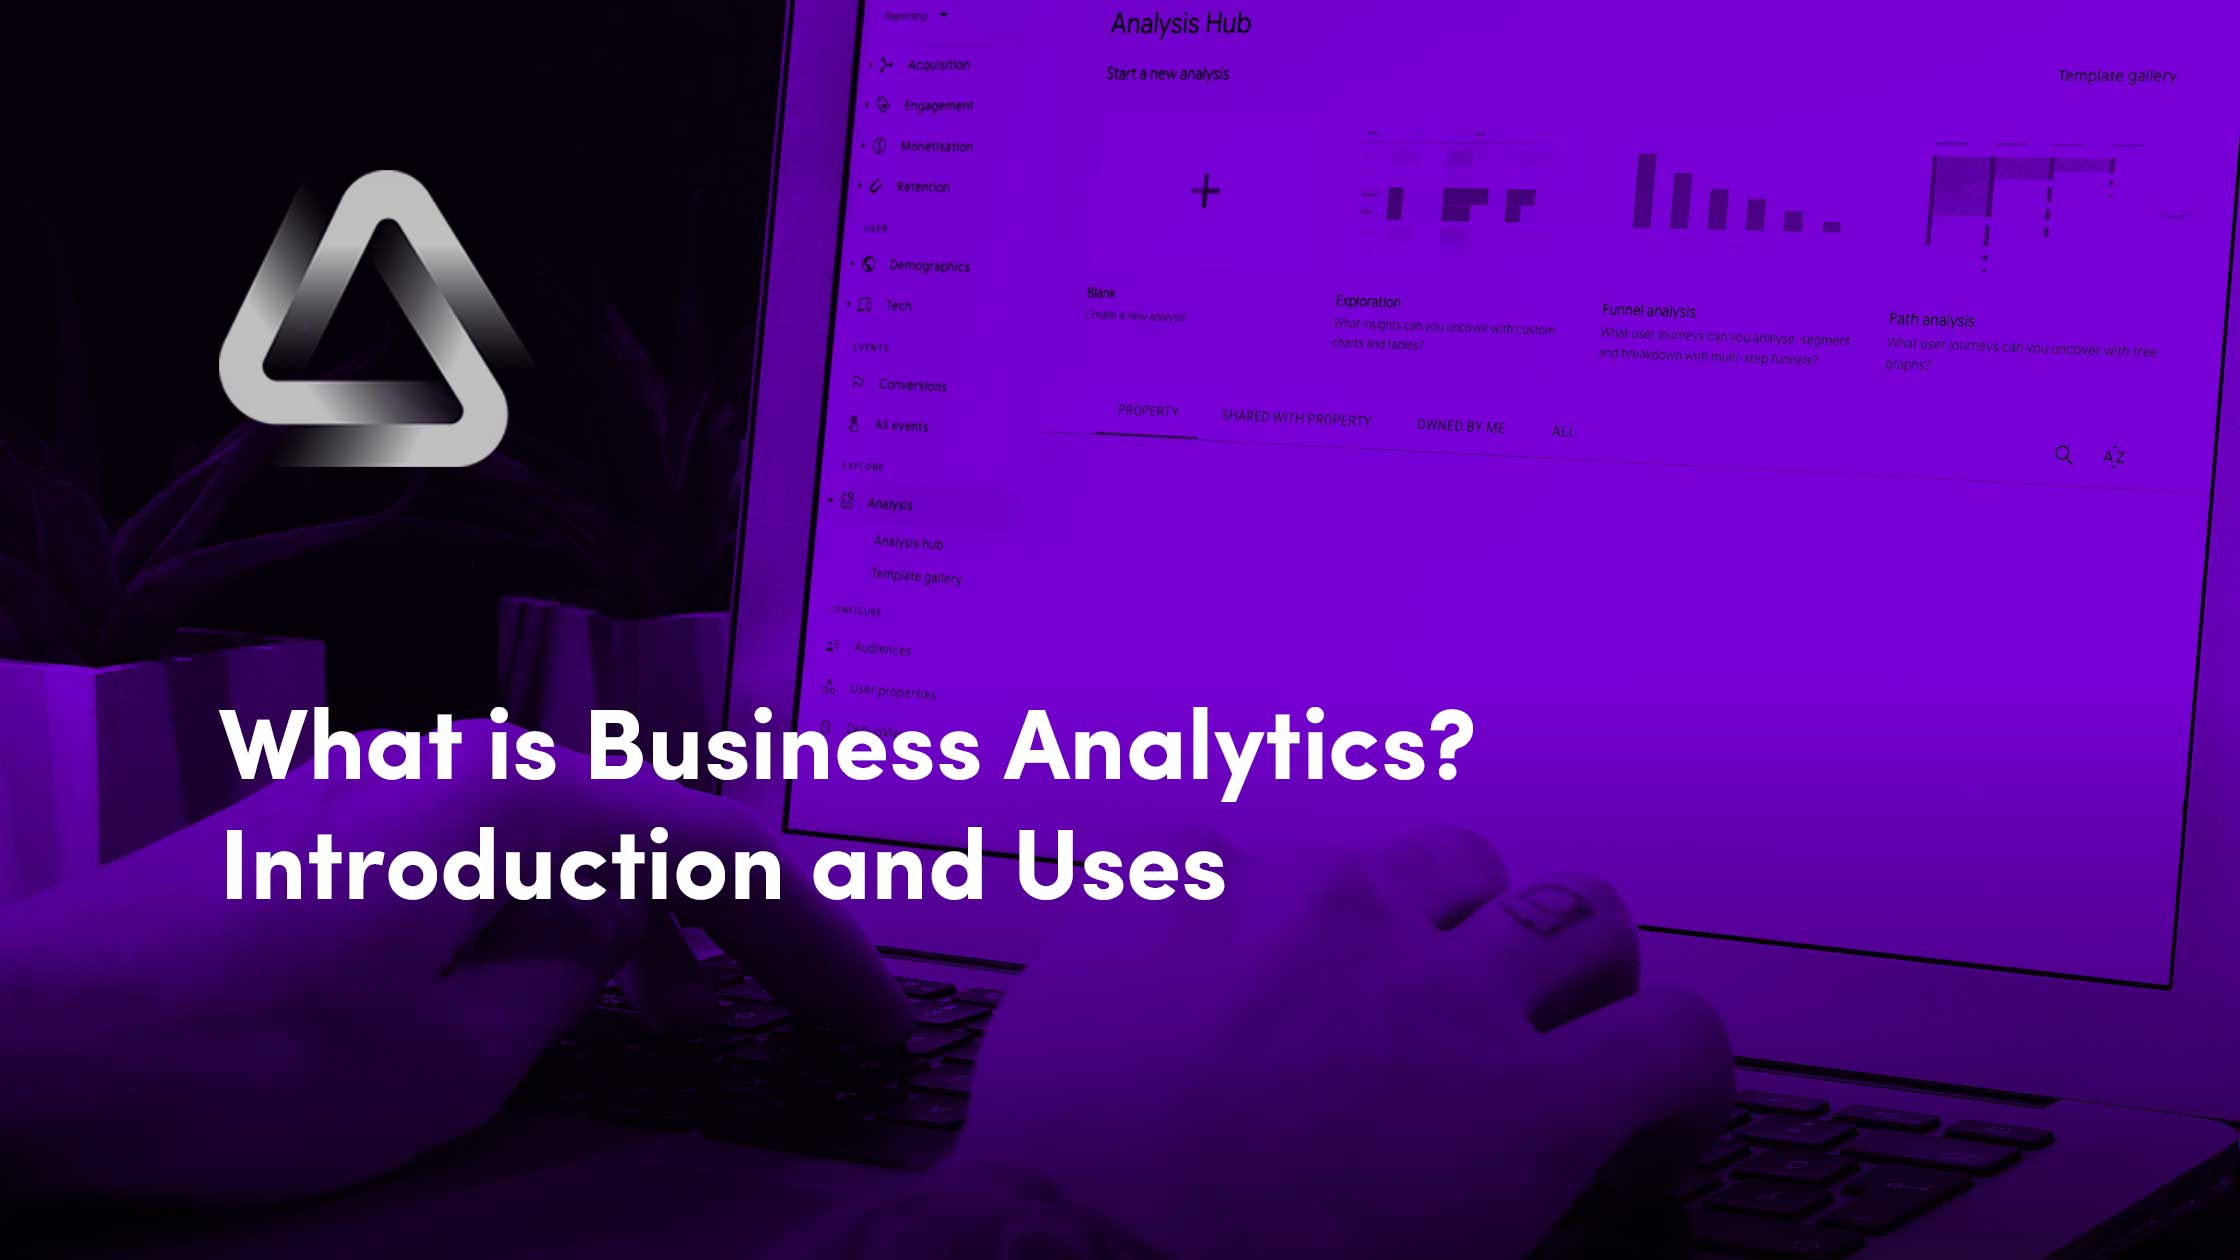 What is Business Analytics - Use cases, introduction, definition and more